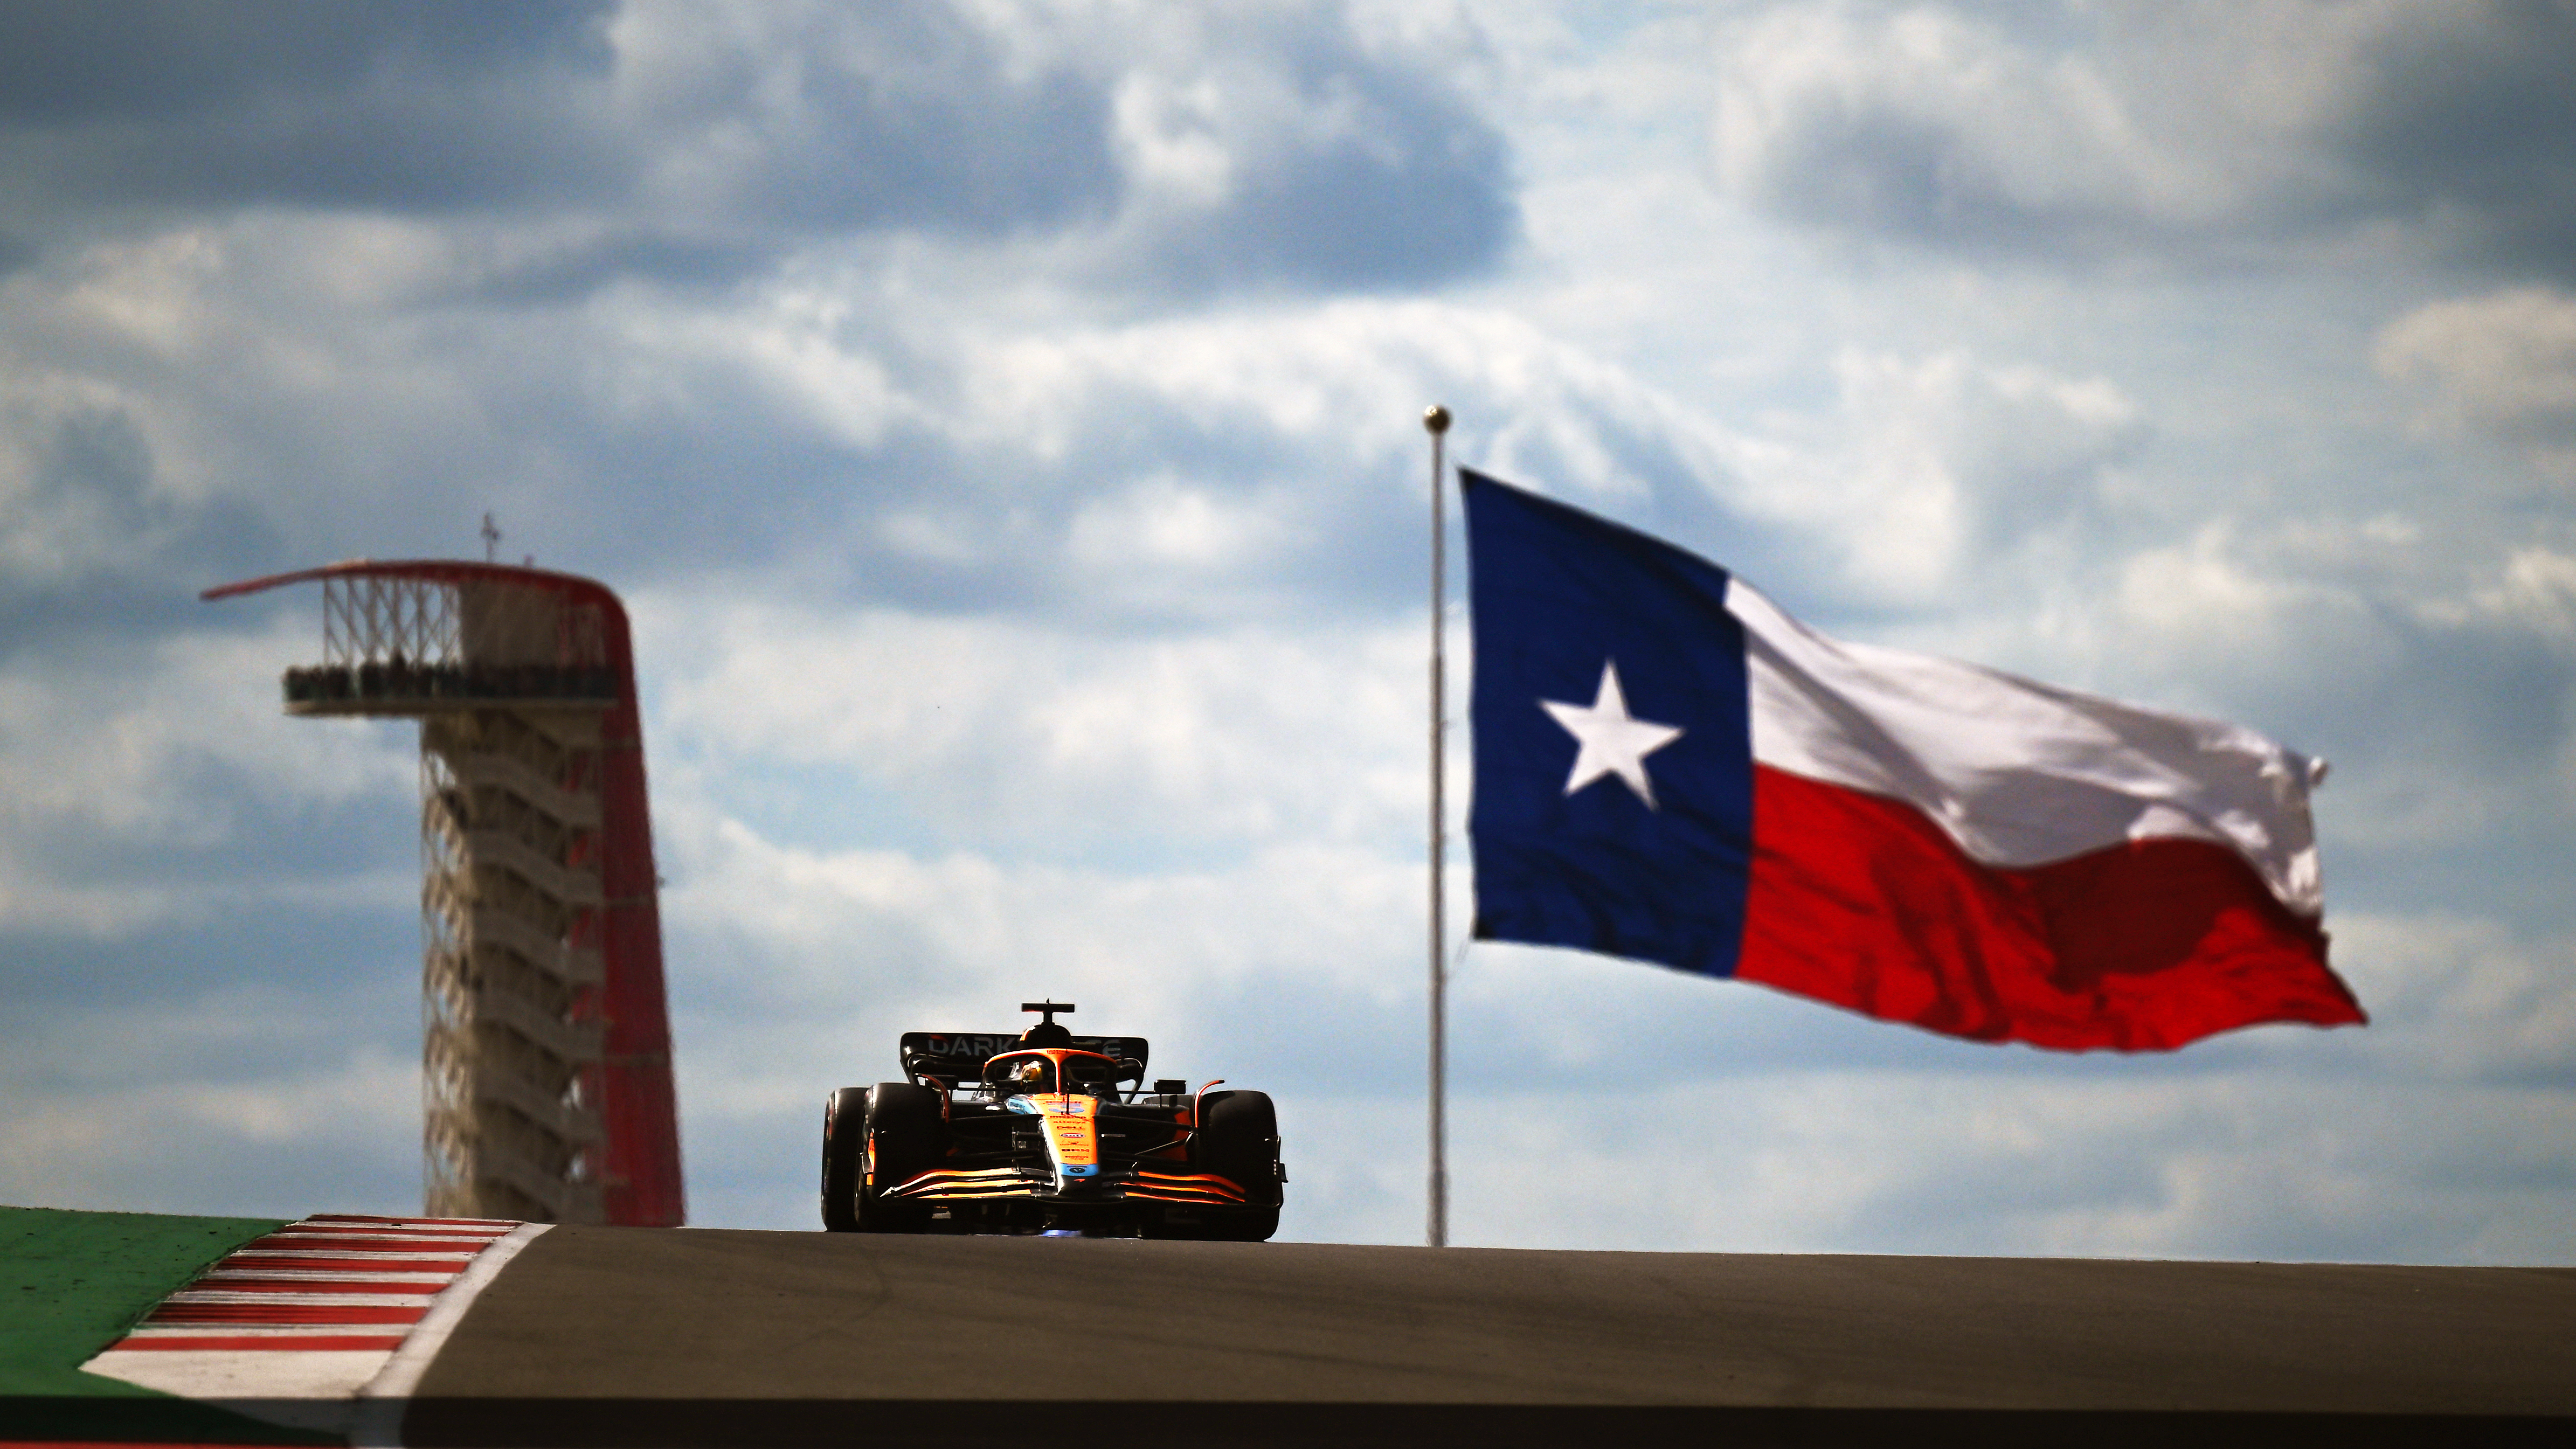 A car on a race track in front of a giant Texas flag.